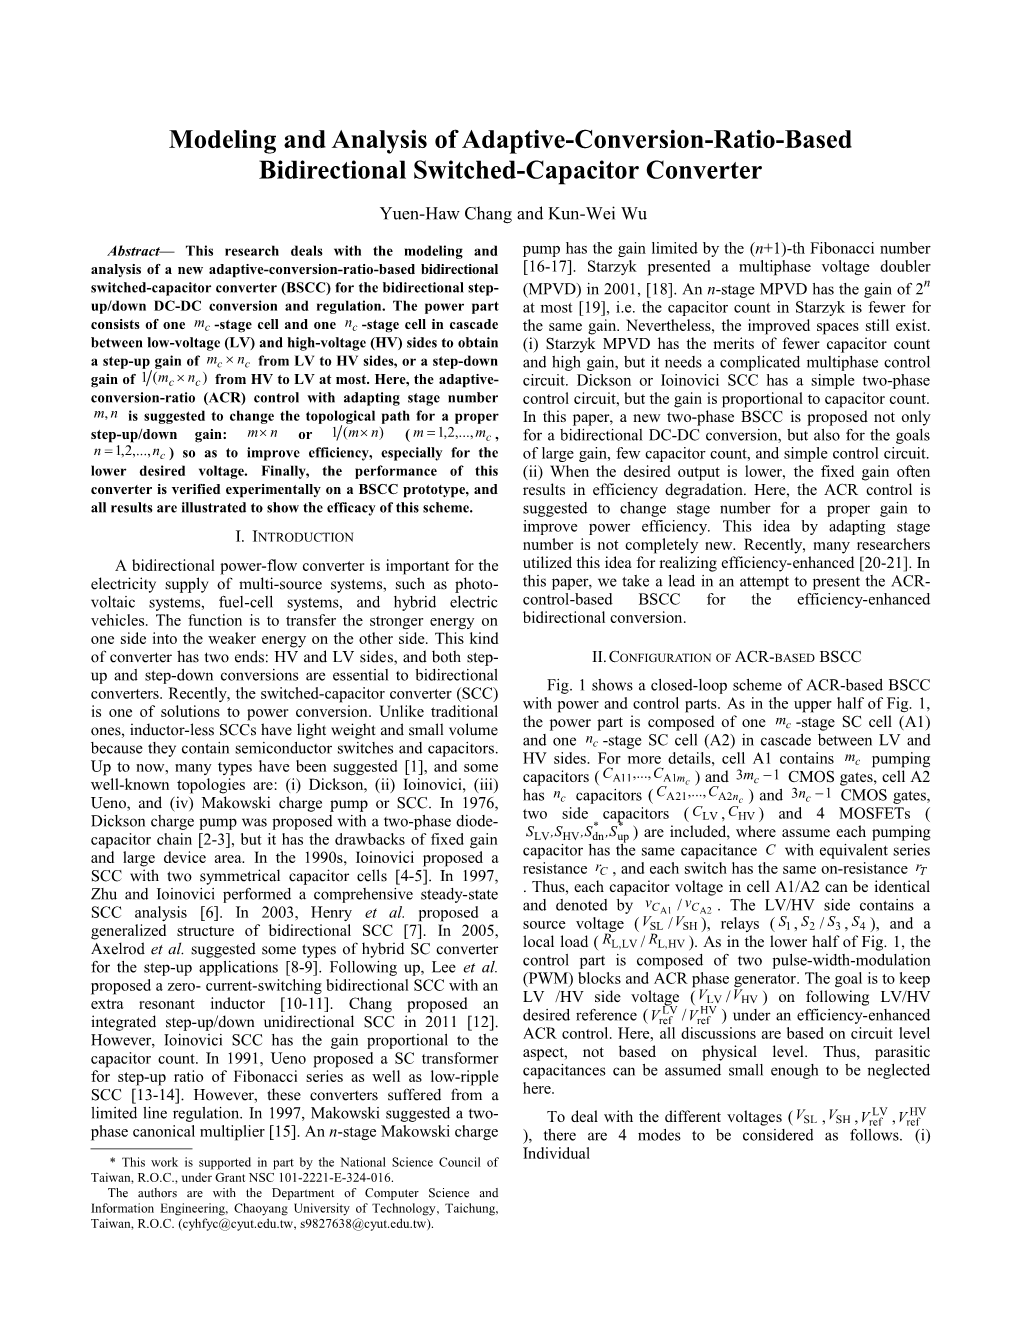 Modeling and Analysis of Adaptive-Conversion-Ratio-Basedbidirectional Switched-Capacitor